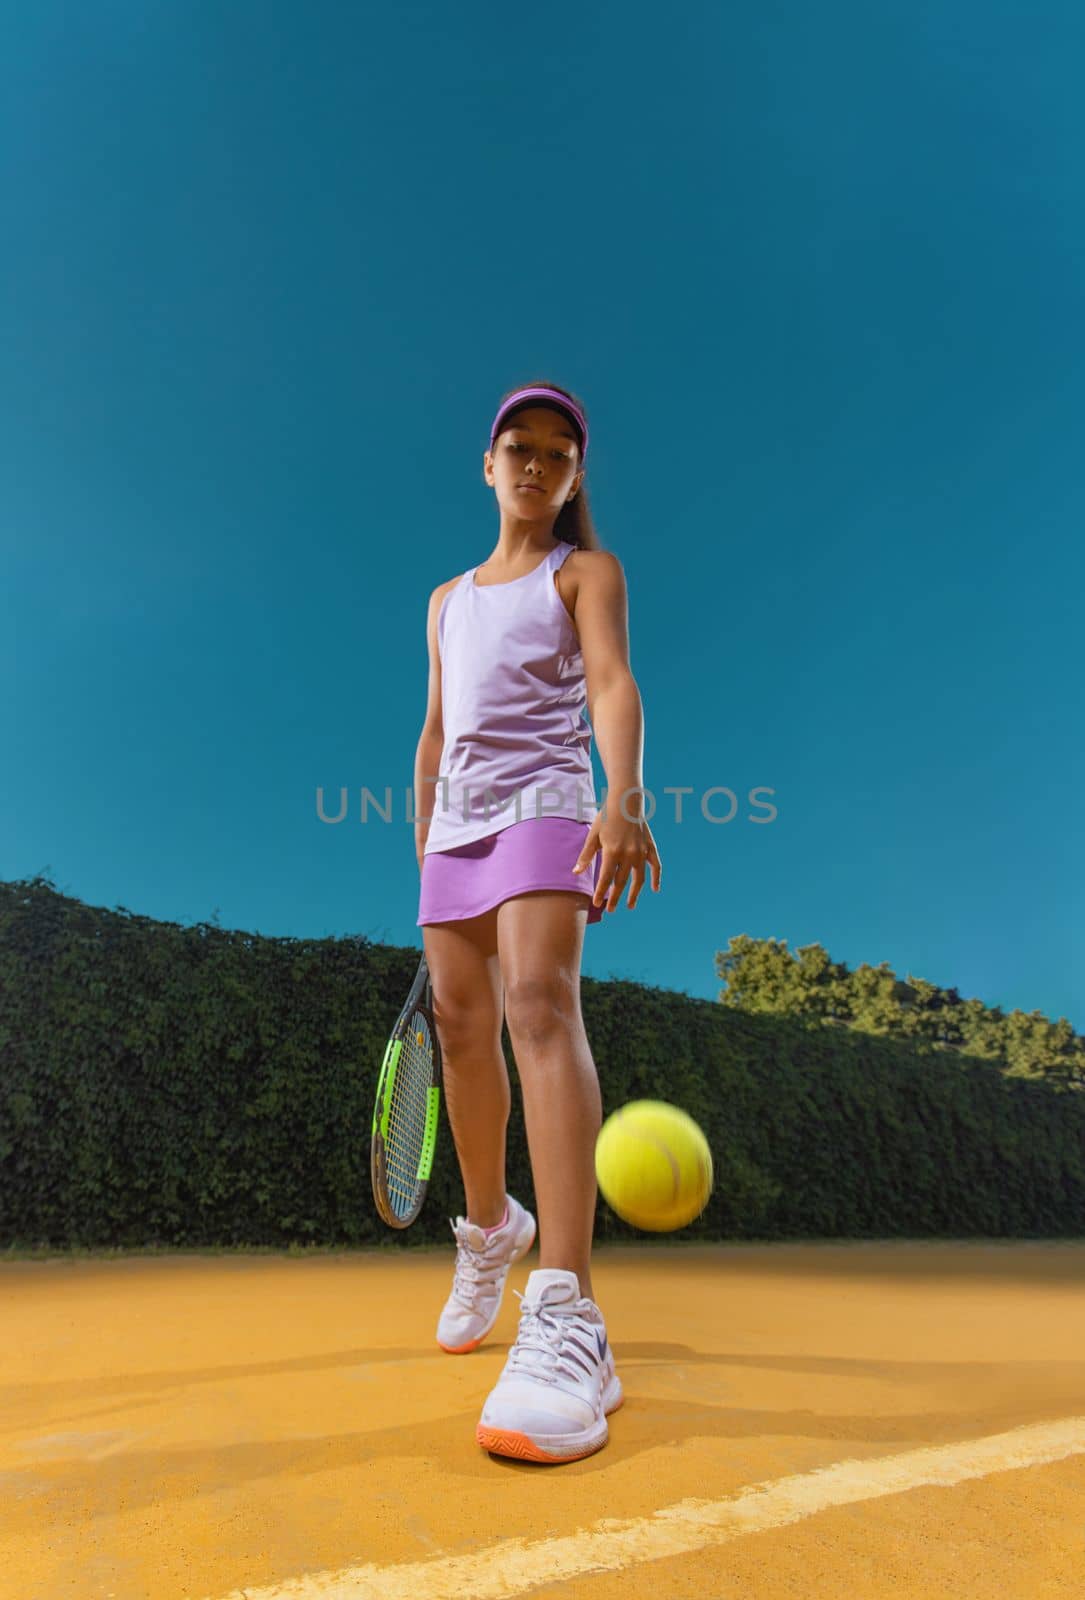 Tennis player. Girl teenager athlete with racket on tennis court. Download photo for advertising in tennis and sports for social networks.